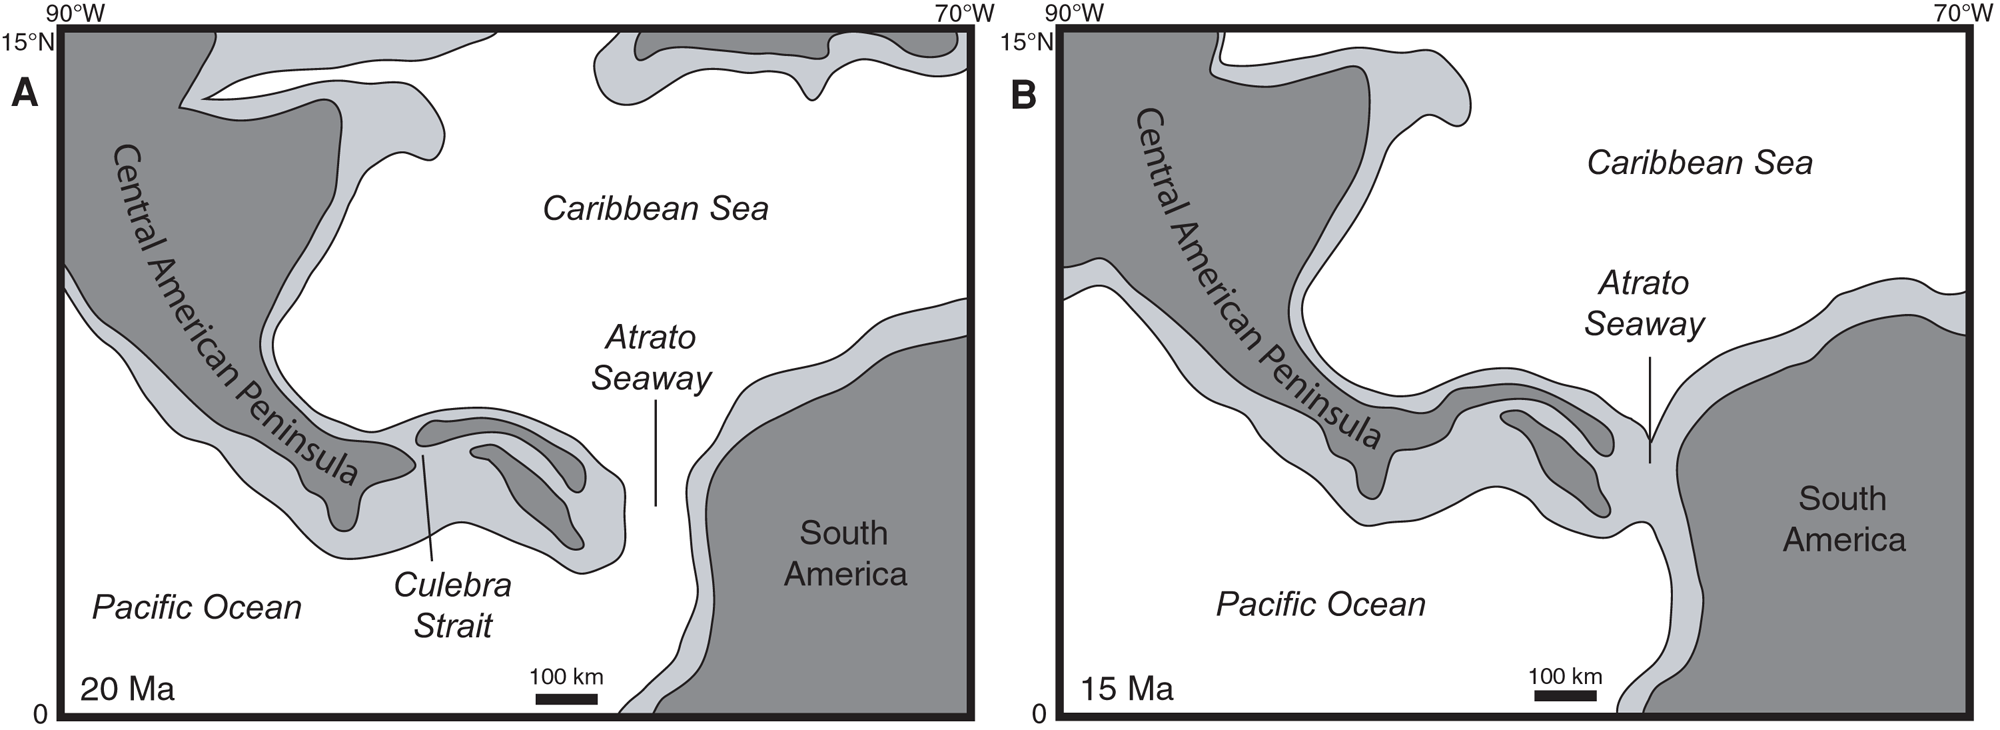 2-Panel image of the closing of stages in the closing of the Isthmus of Panama at 20 million years ago and 15 million years ago.